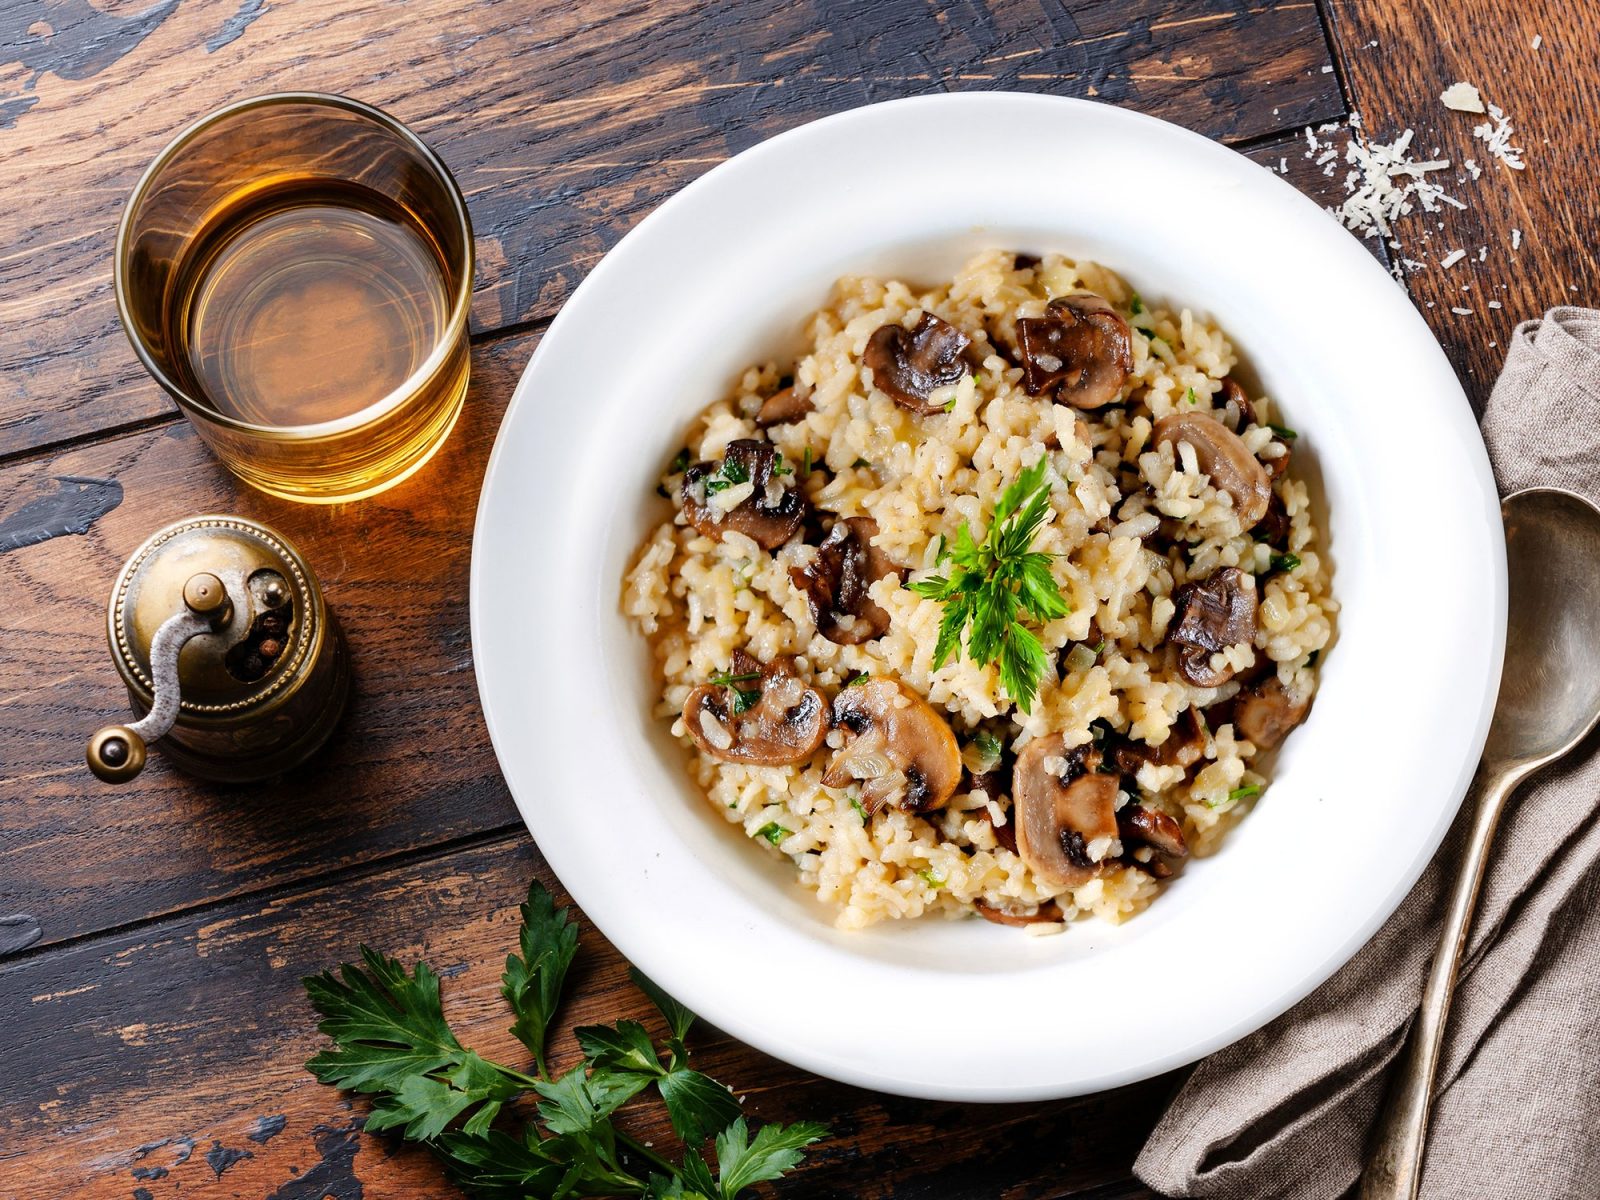 Eat an Italian Feast and We’ll Reveal Your Dream Italian Vacation Italian risotto